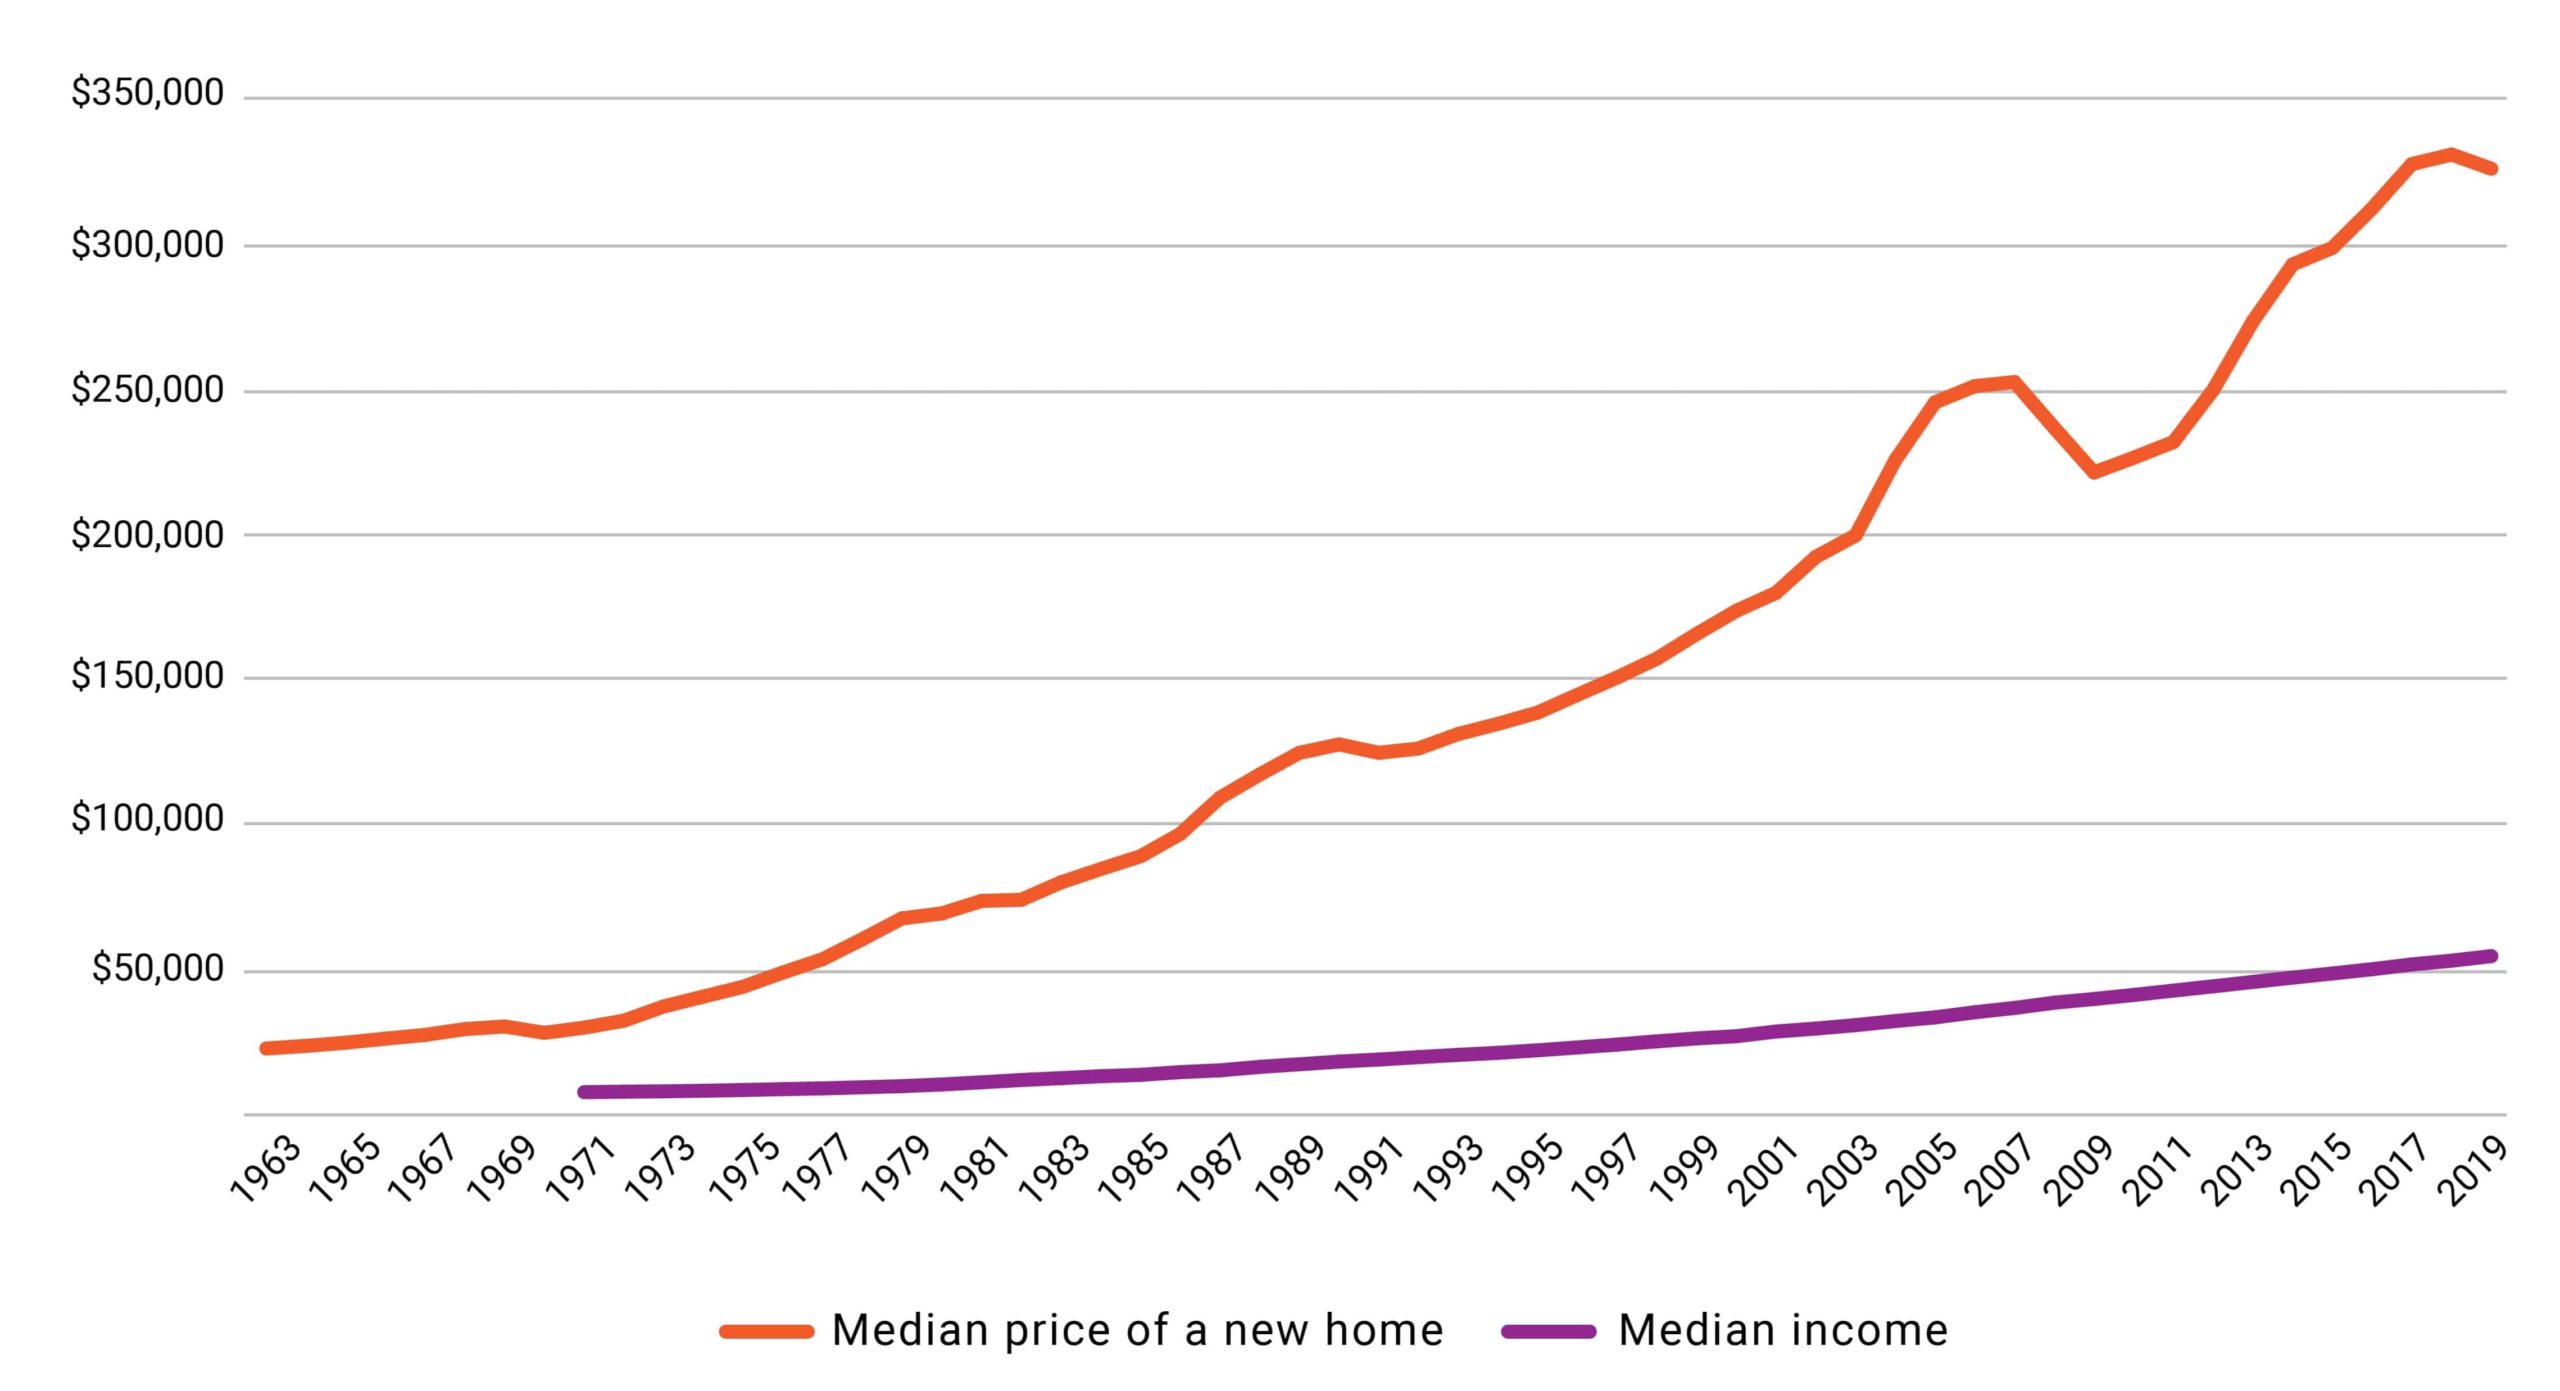 Figure 5. Median Sale Price of a New Home vs. Pre-Tax Median Household Income in Nominal Dollars, 1963-2019